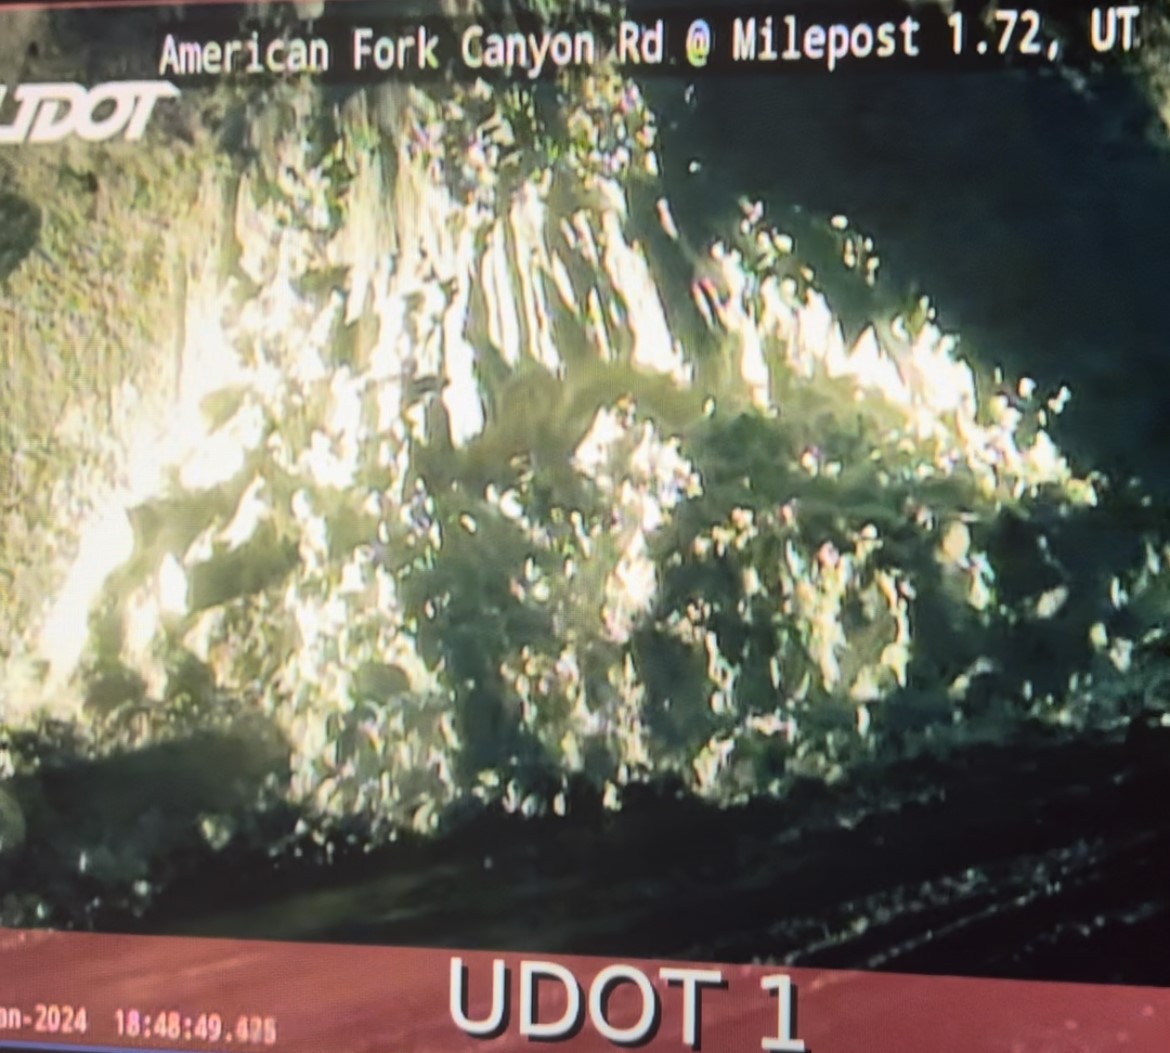 There's debris on S.R. 144 after an avalanche slide across the road in American Fork Canyon. (Photo screenshot from UDOT)